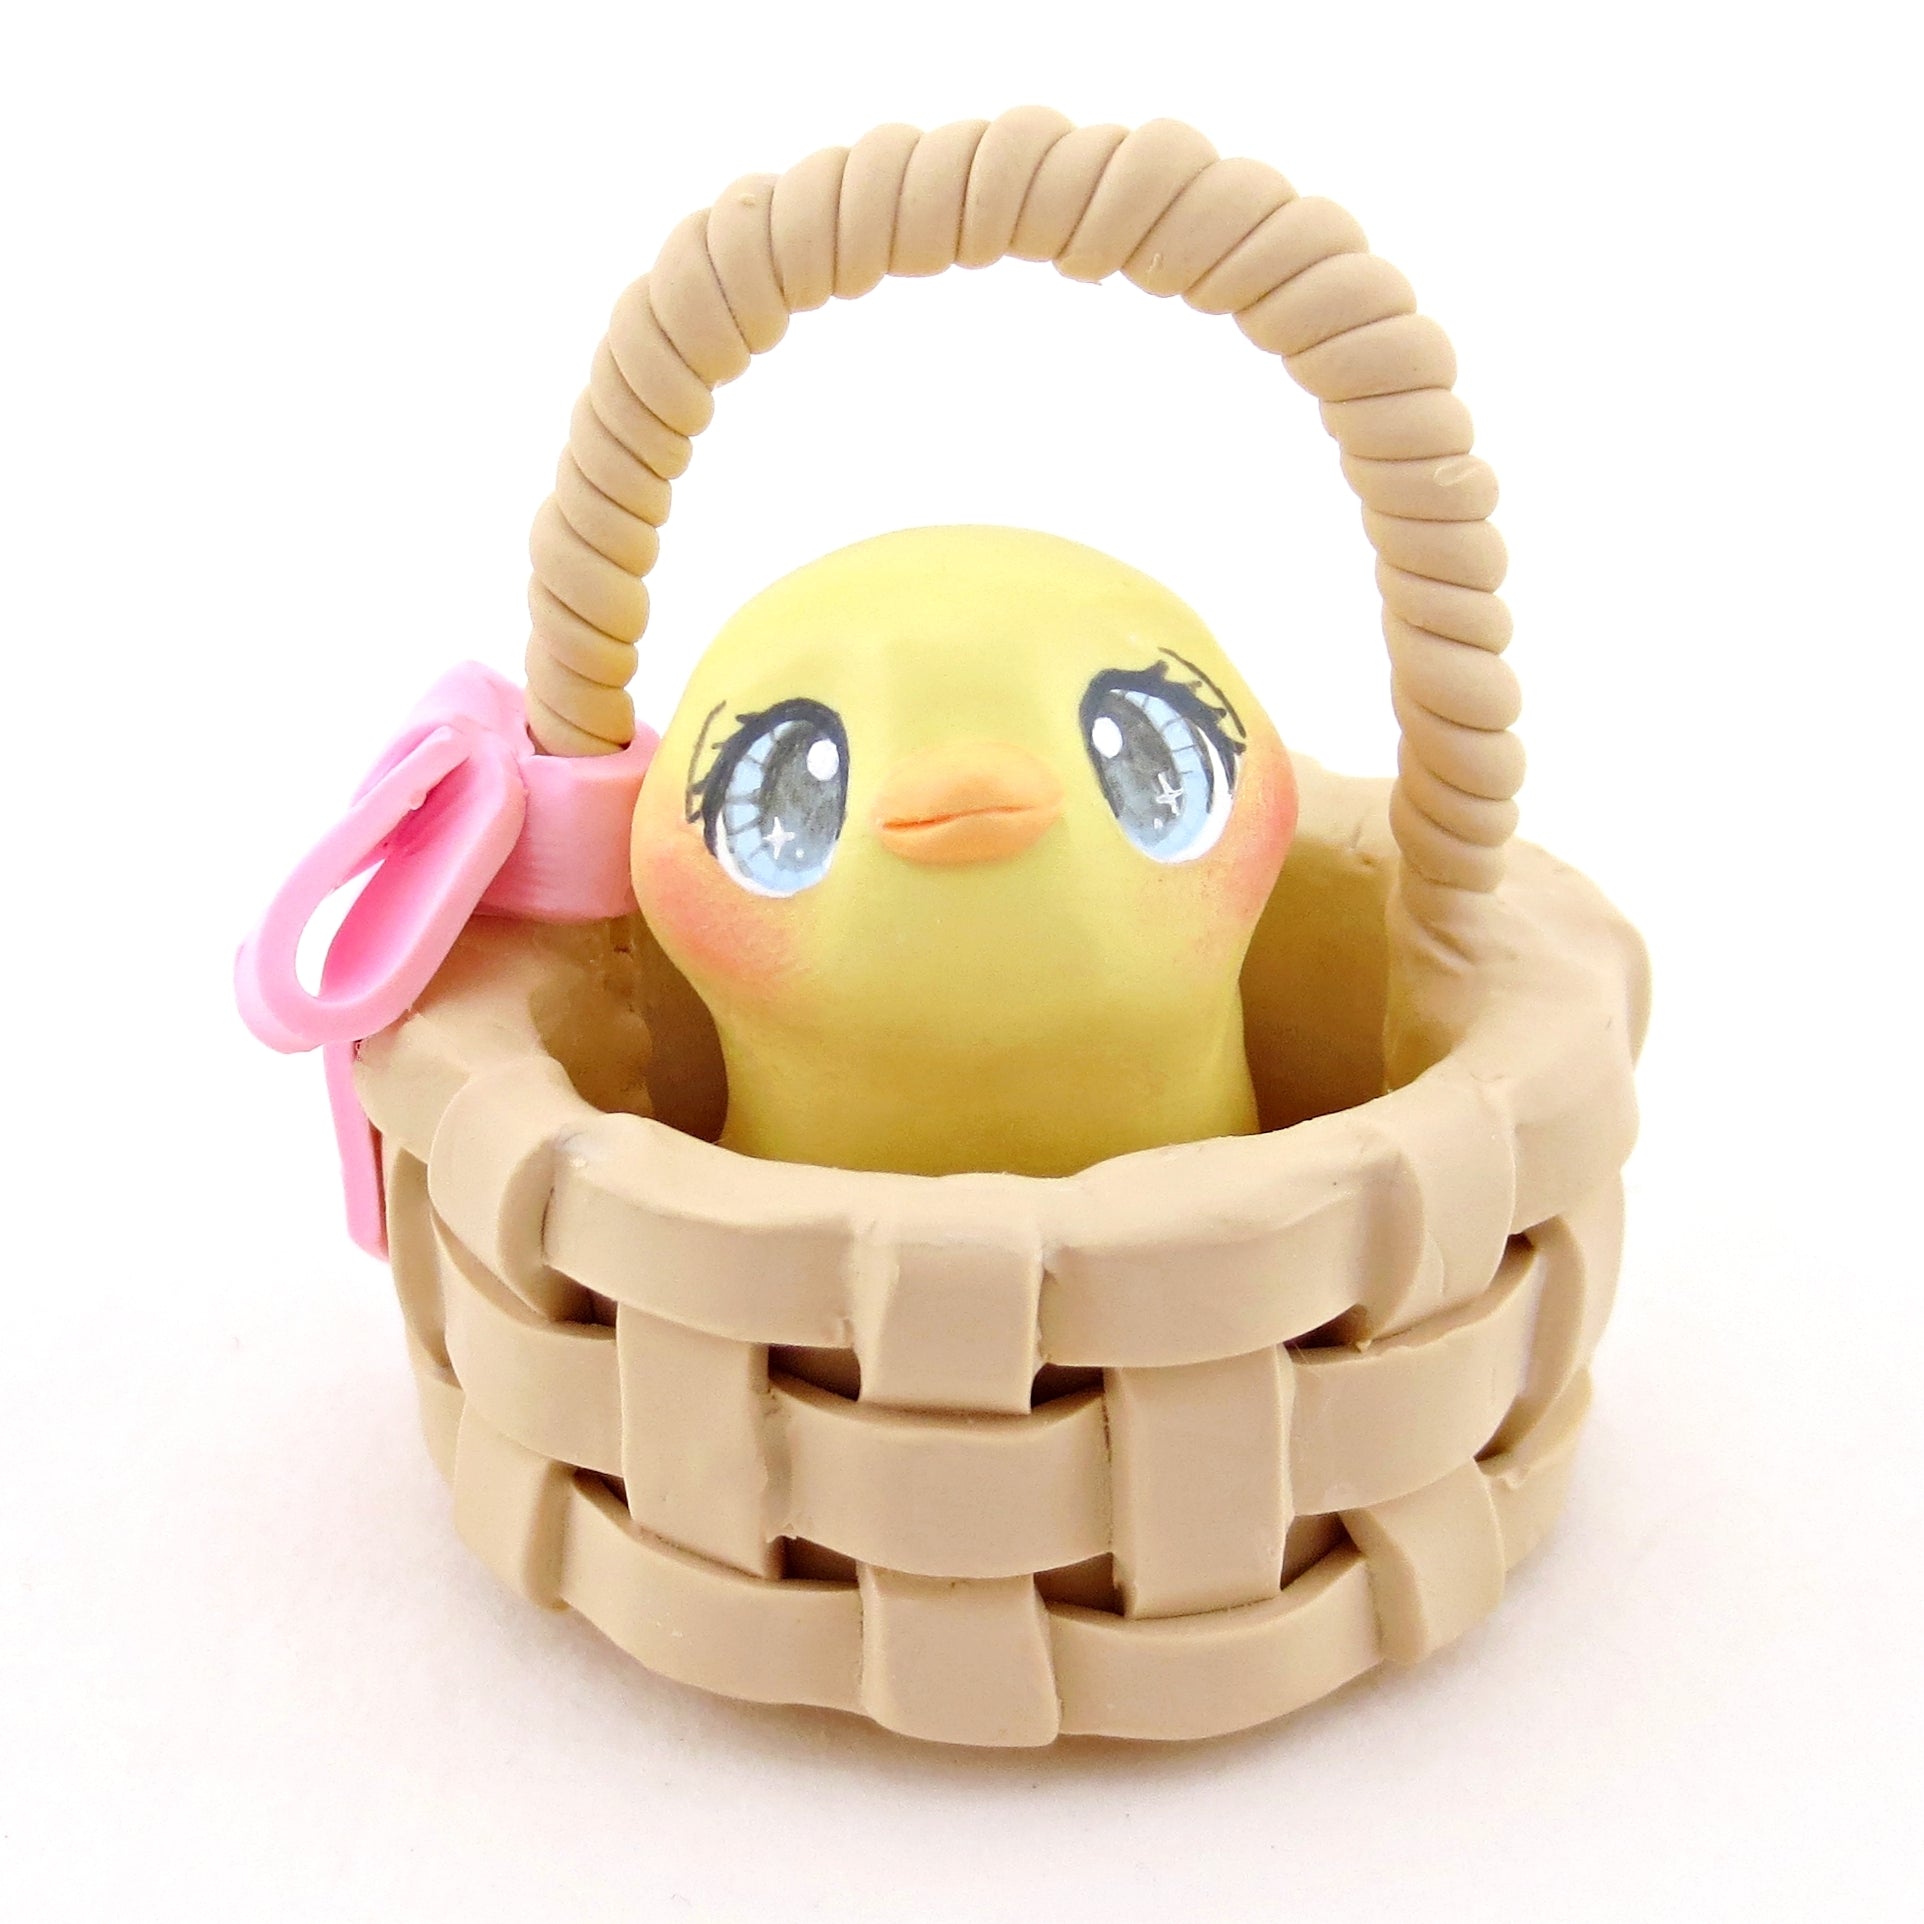 Chick in an Easter Basket Figurine - Polymer Clay Easter Animal Collection